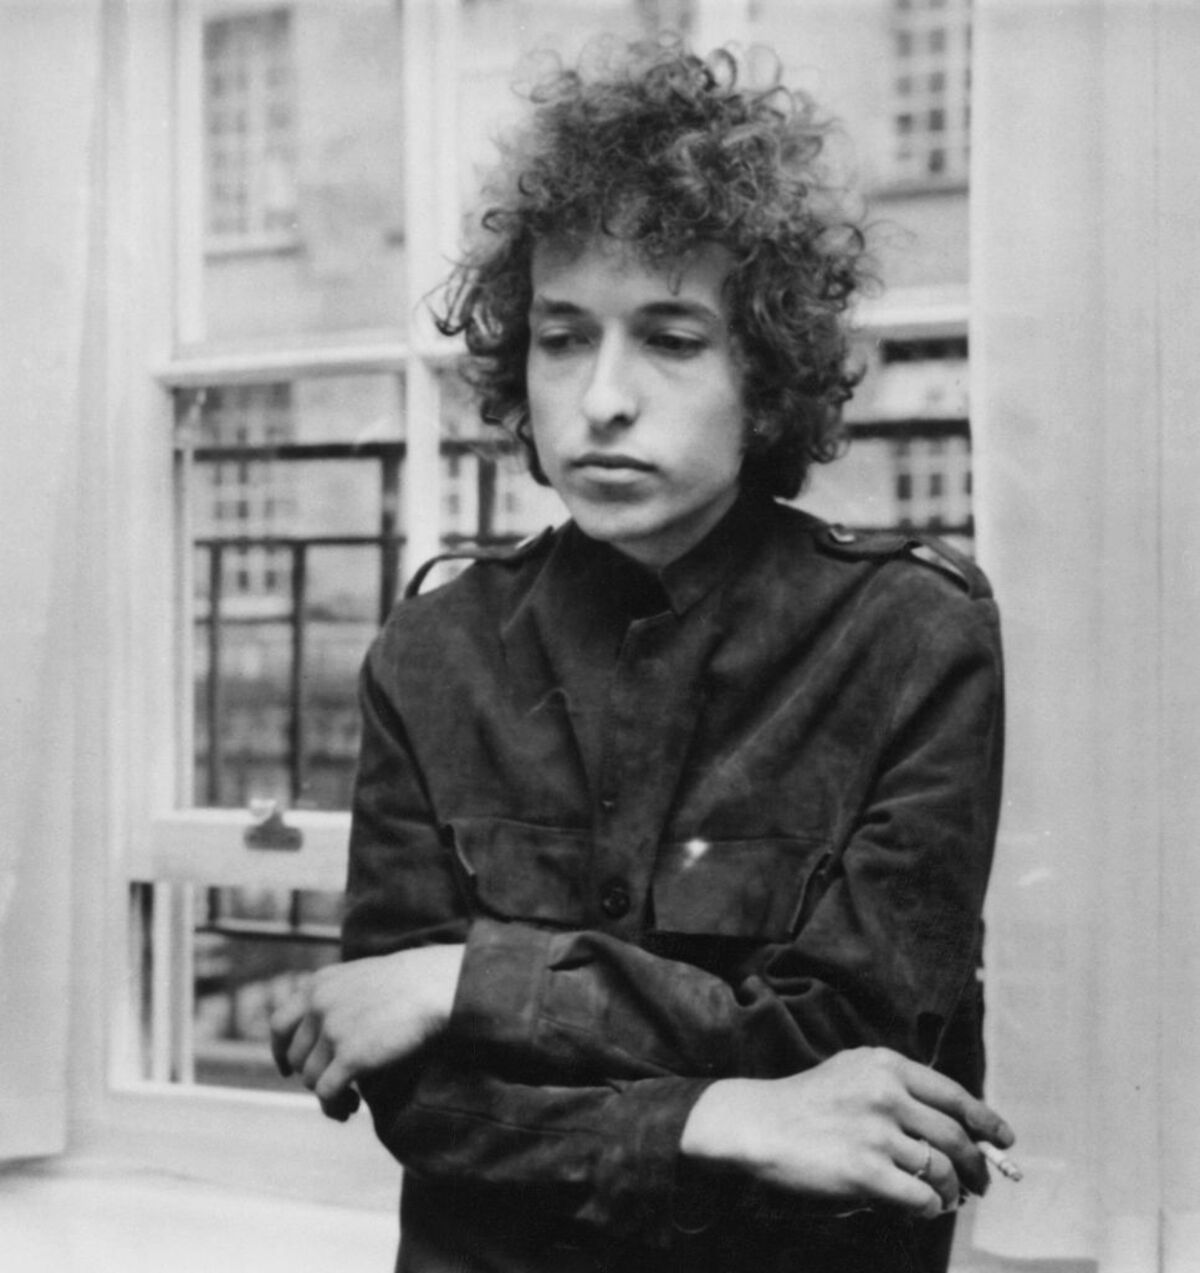 POEM] and [OPINION] Make You Feel My Love by Bob Dylan : r/Poetry